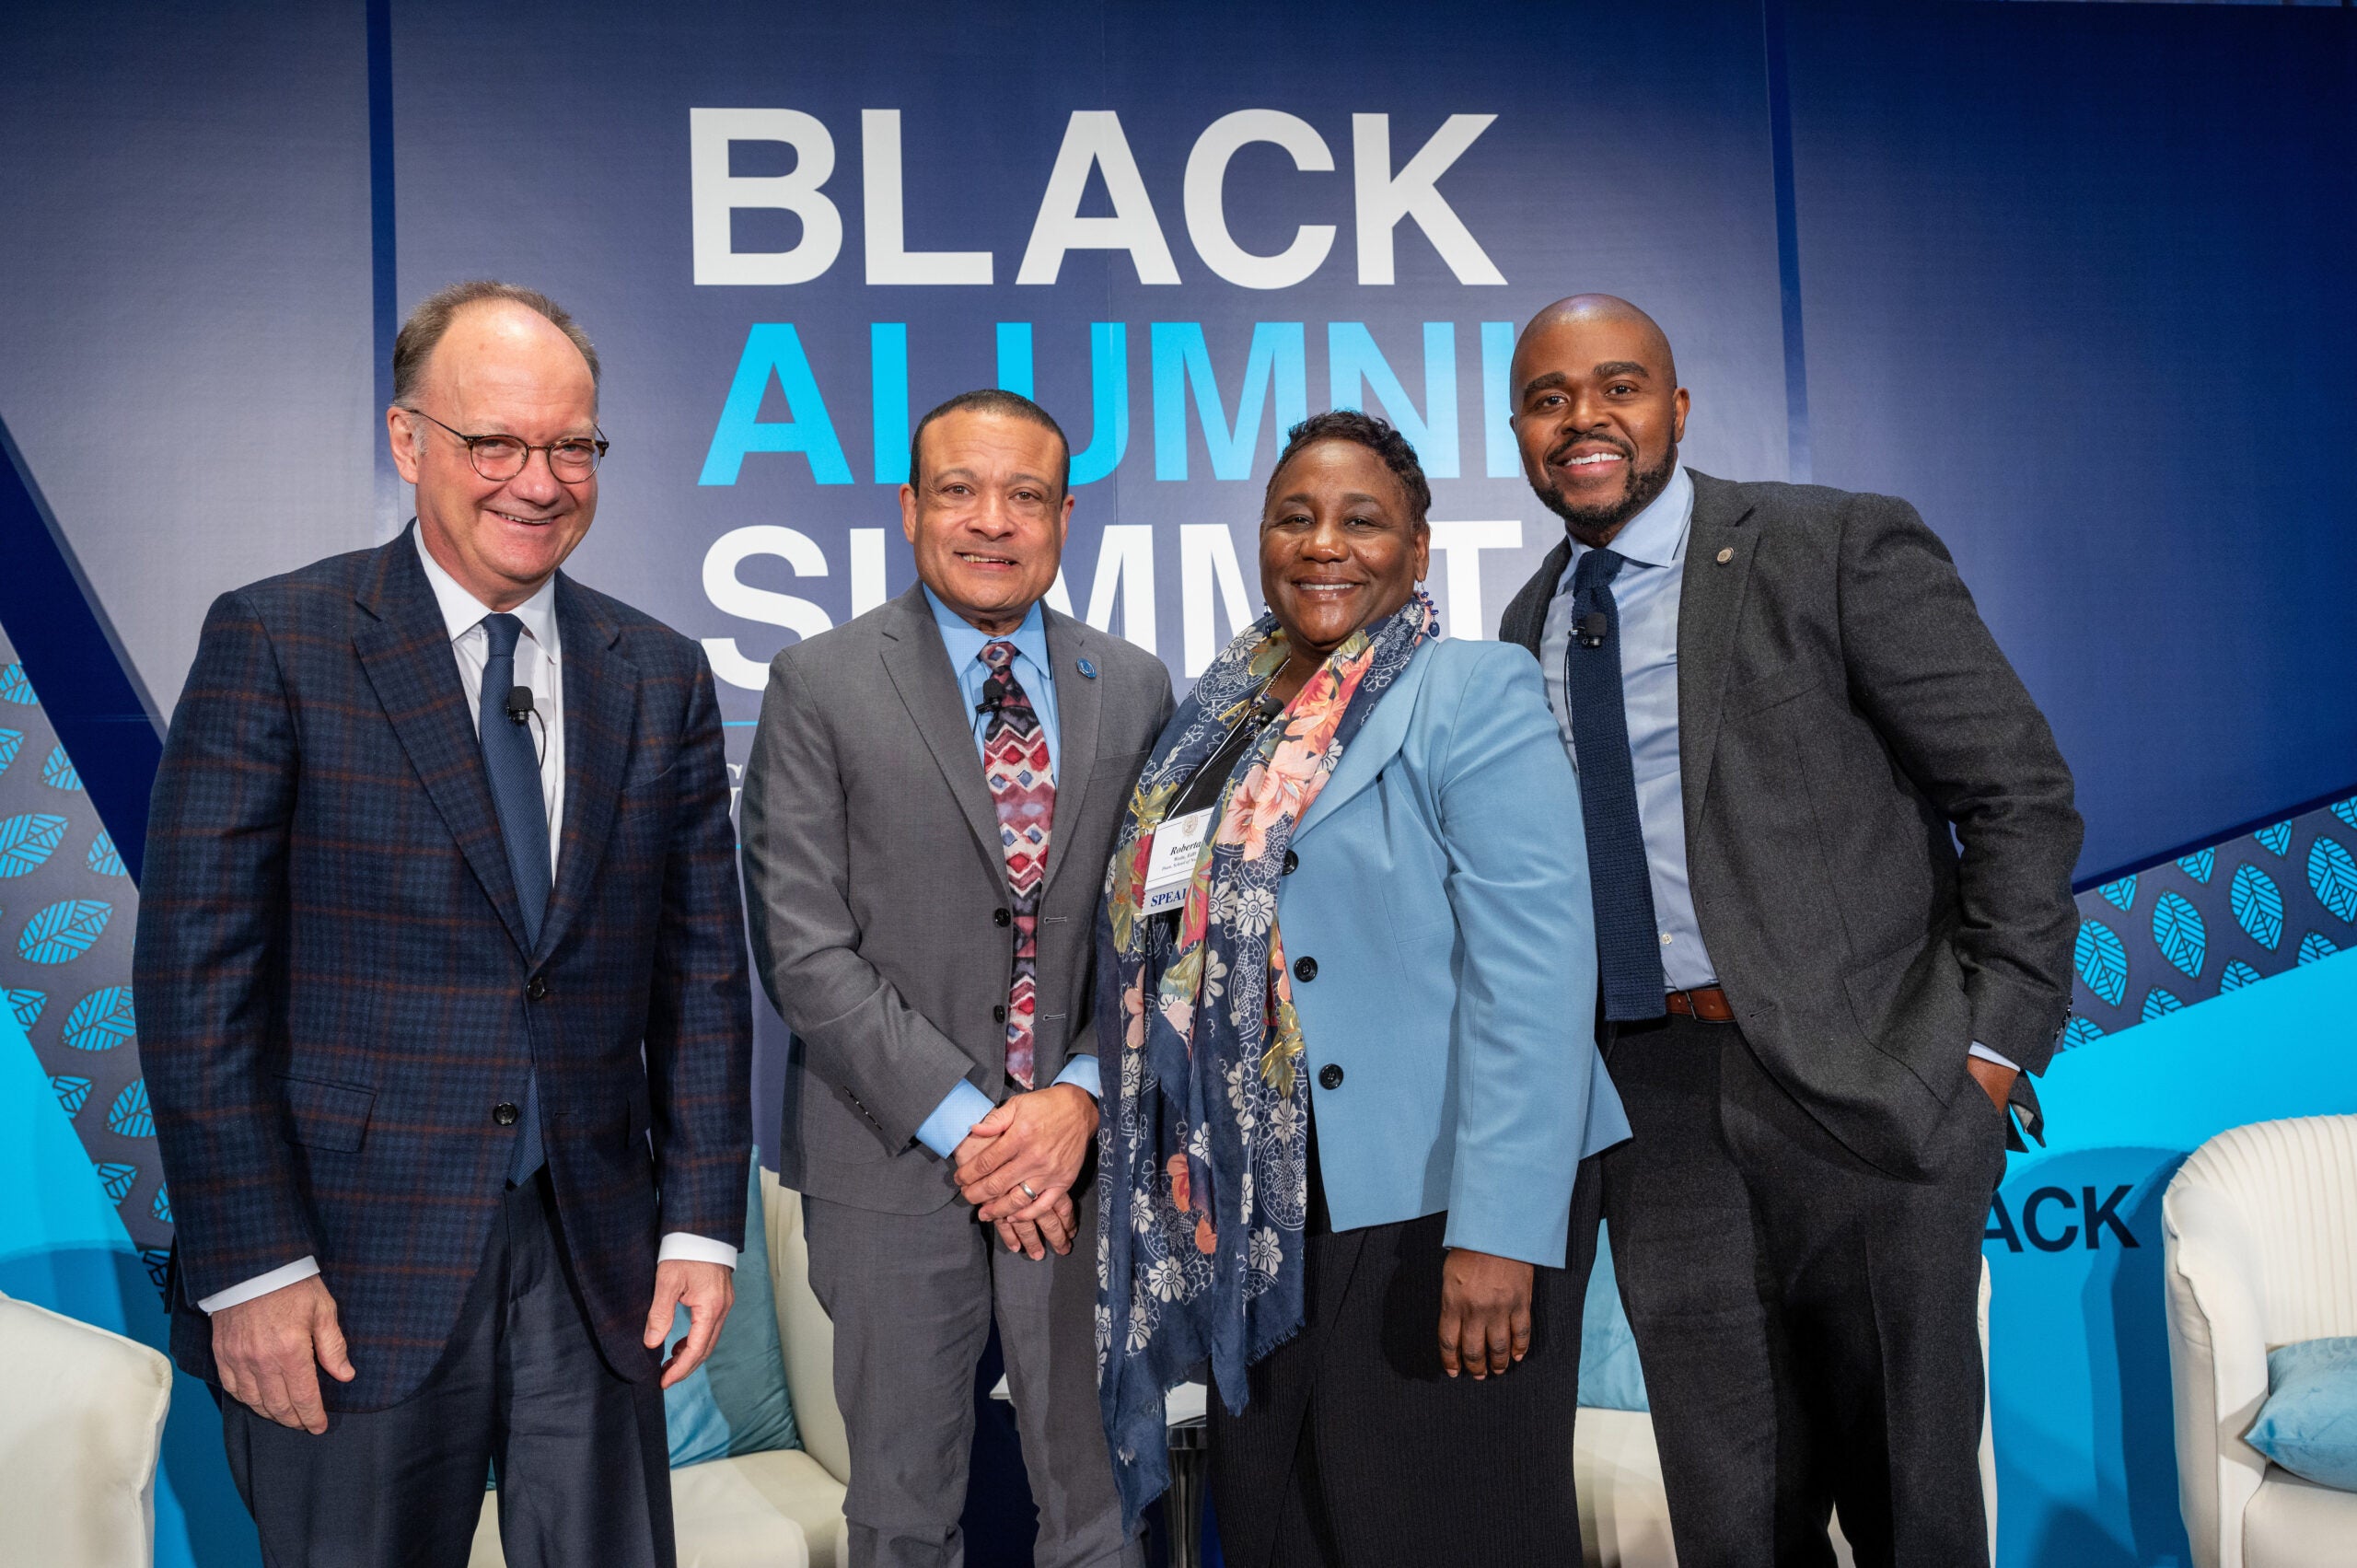 four people stand next to each other with the word "Black Alumni Summit" behind them